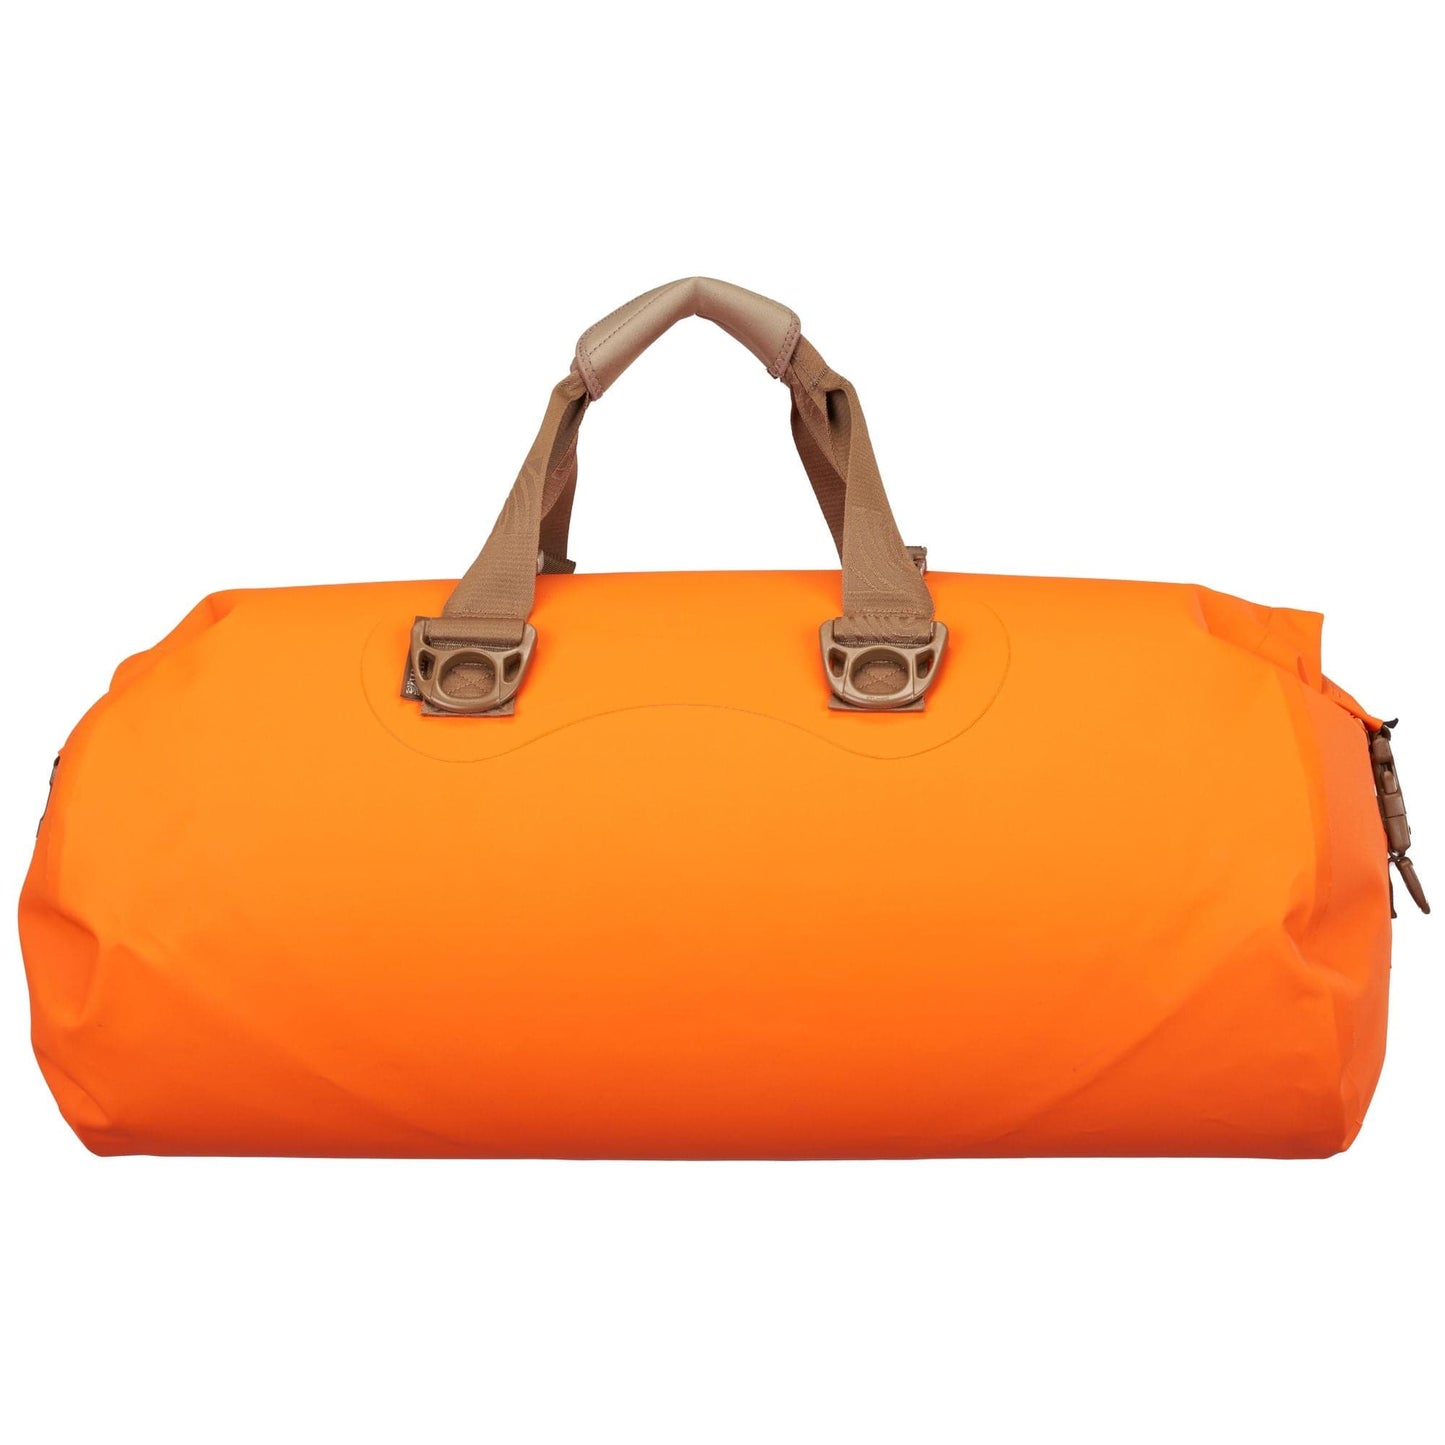 Featuring the Yukon Duffel dry bag manufactured by Watershed shown here from one angle.